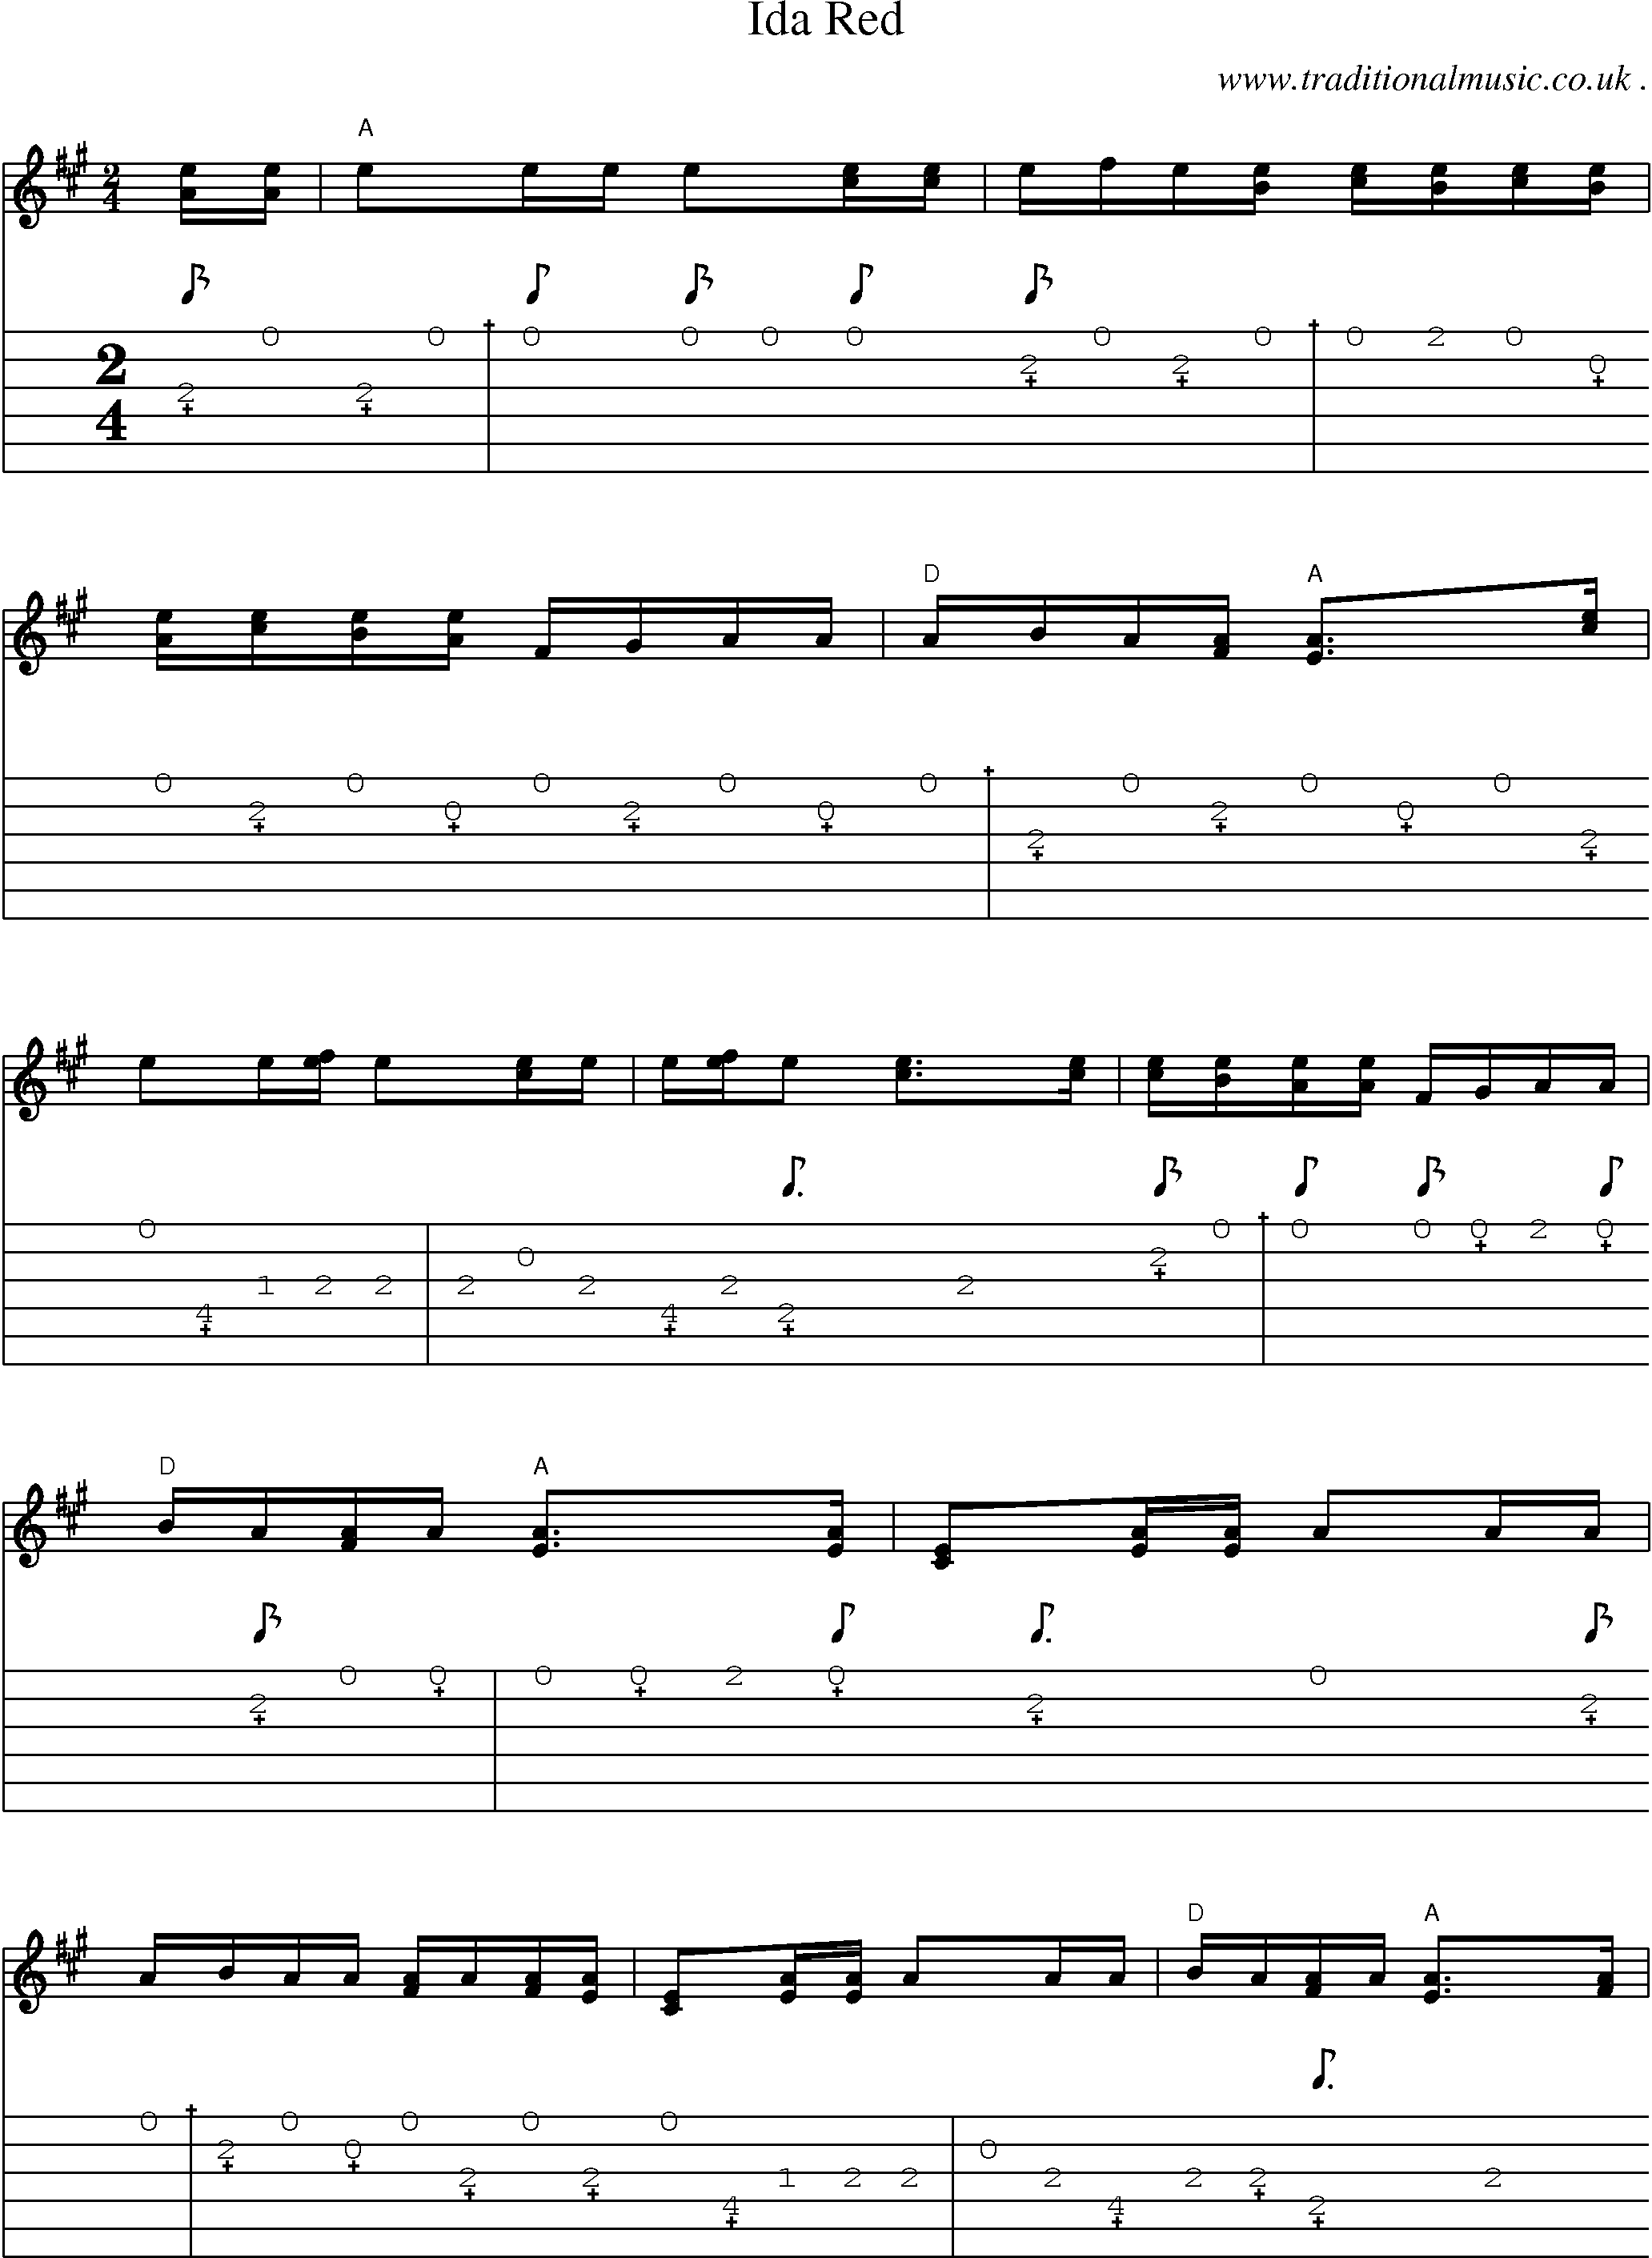 Music Score and Guitar Tabs for Ida Red